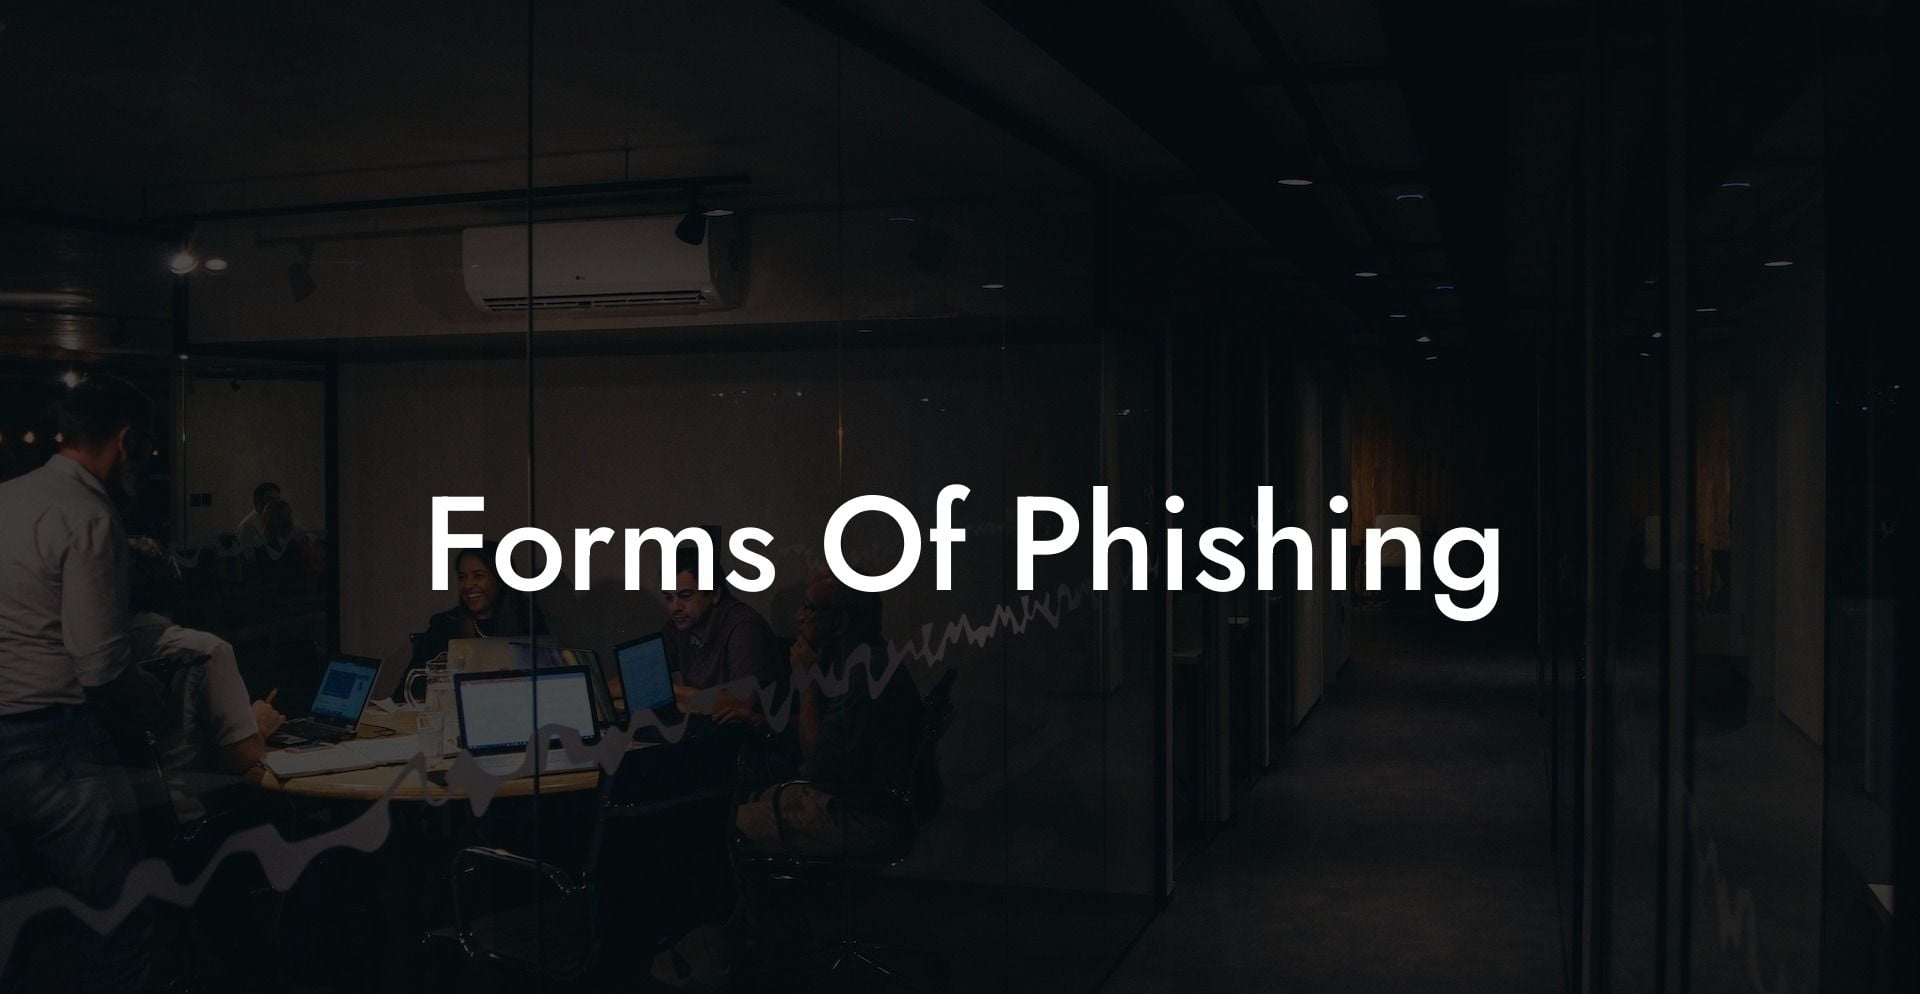 Forms Of Phishing